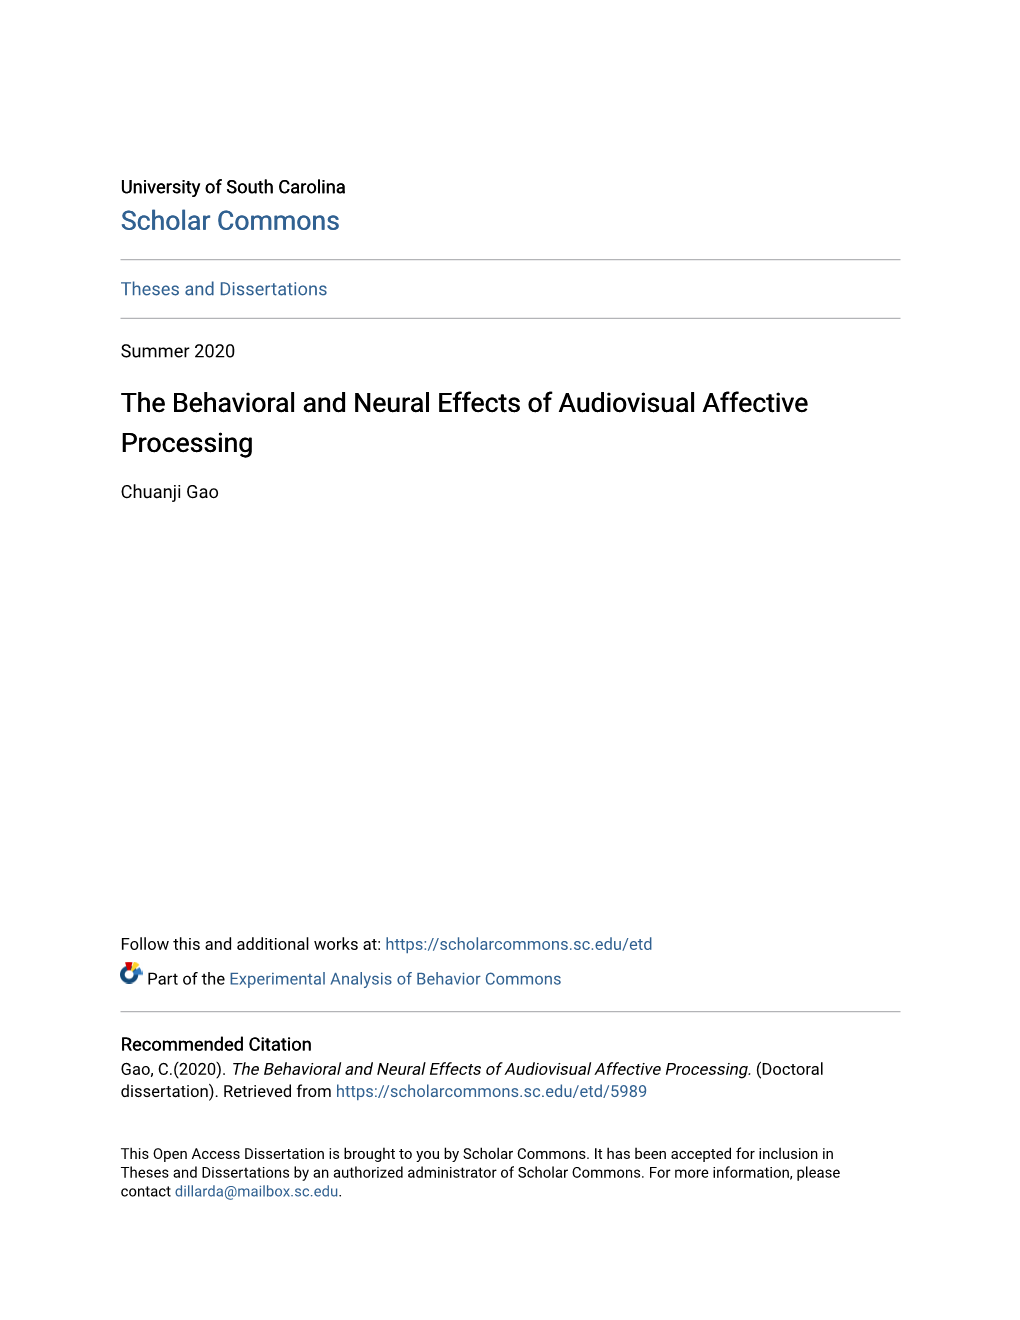 The Behavioral and Neural Effects of Audiovisual Affective Processing